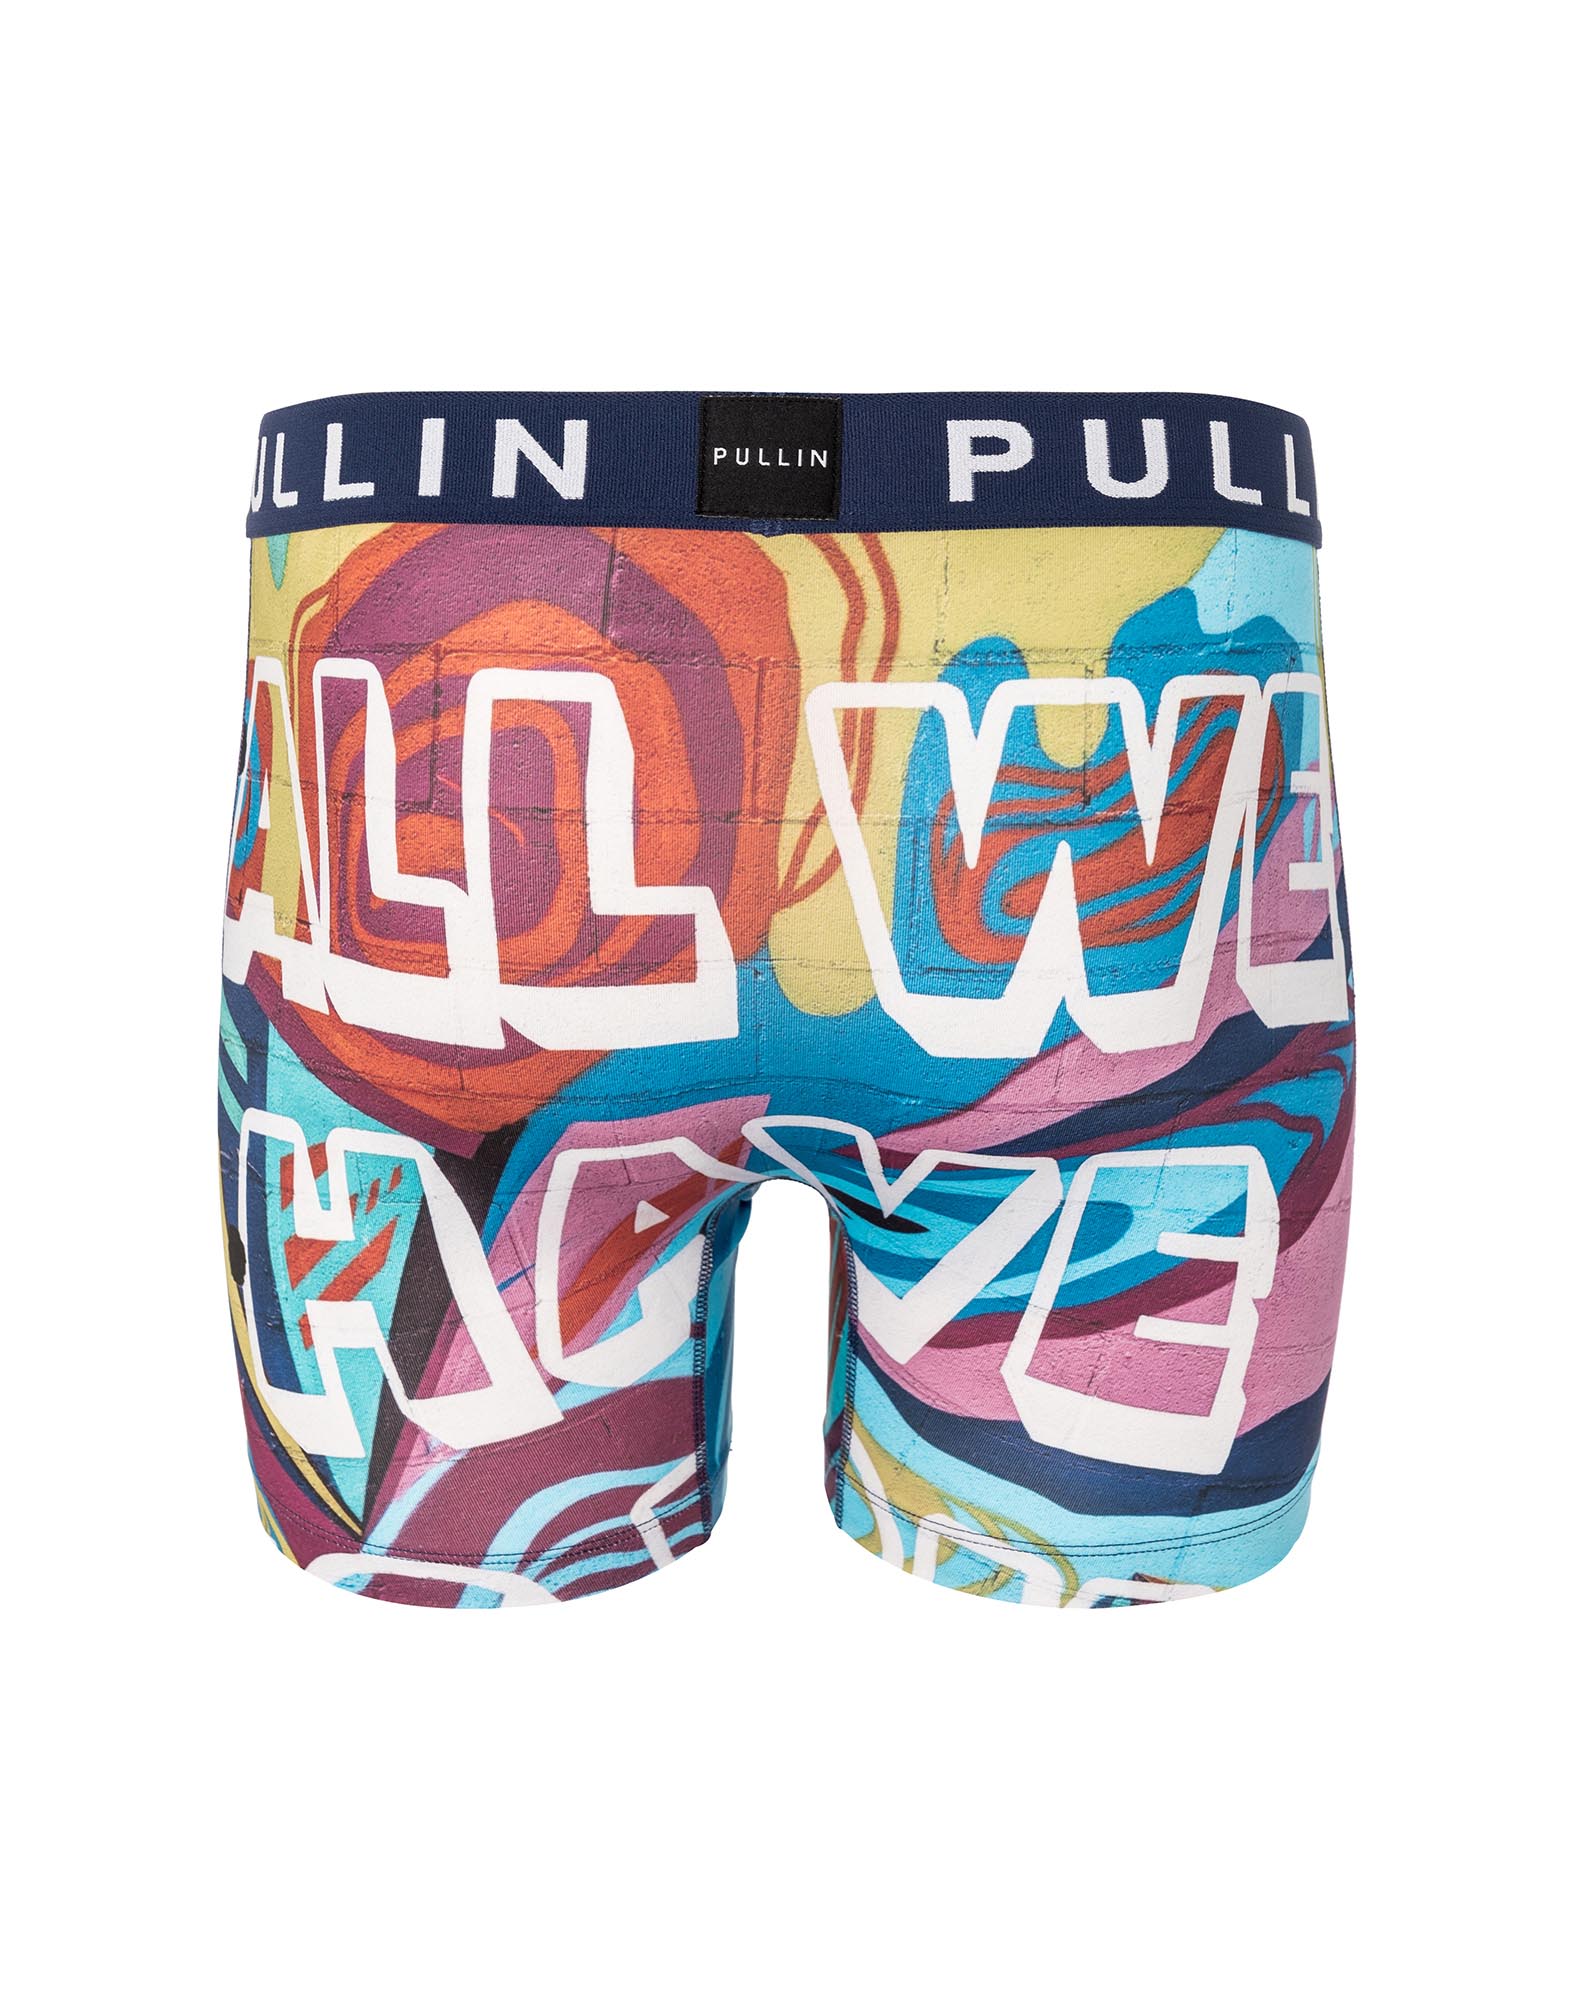 Men's printed trunk FASHION 2 ALLWEHAVE